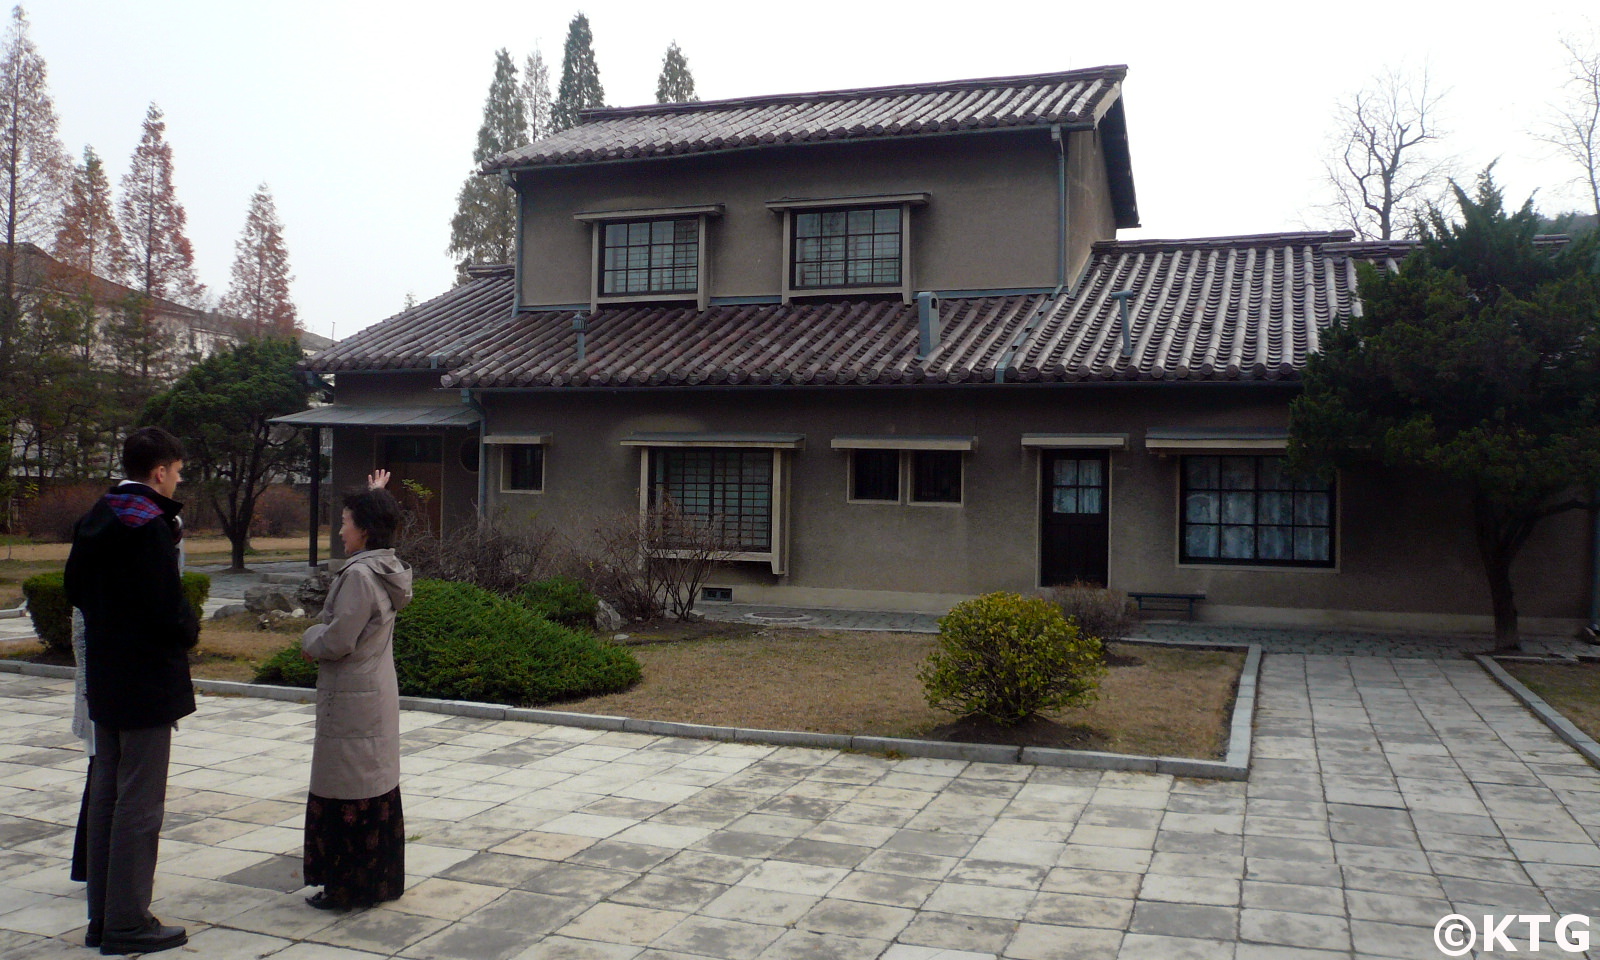 Replica of the Tongyang guesthouse at the train station revolutionary site in Wonsan, DPRK. Picture taken by KTG Tours